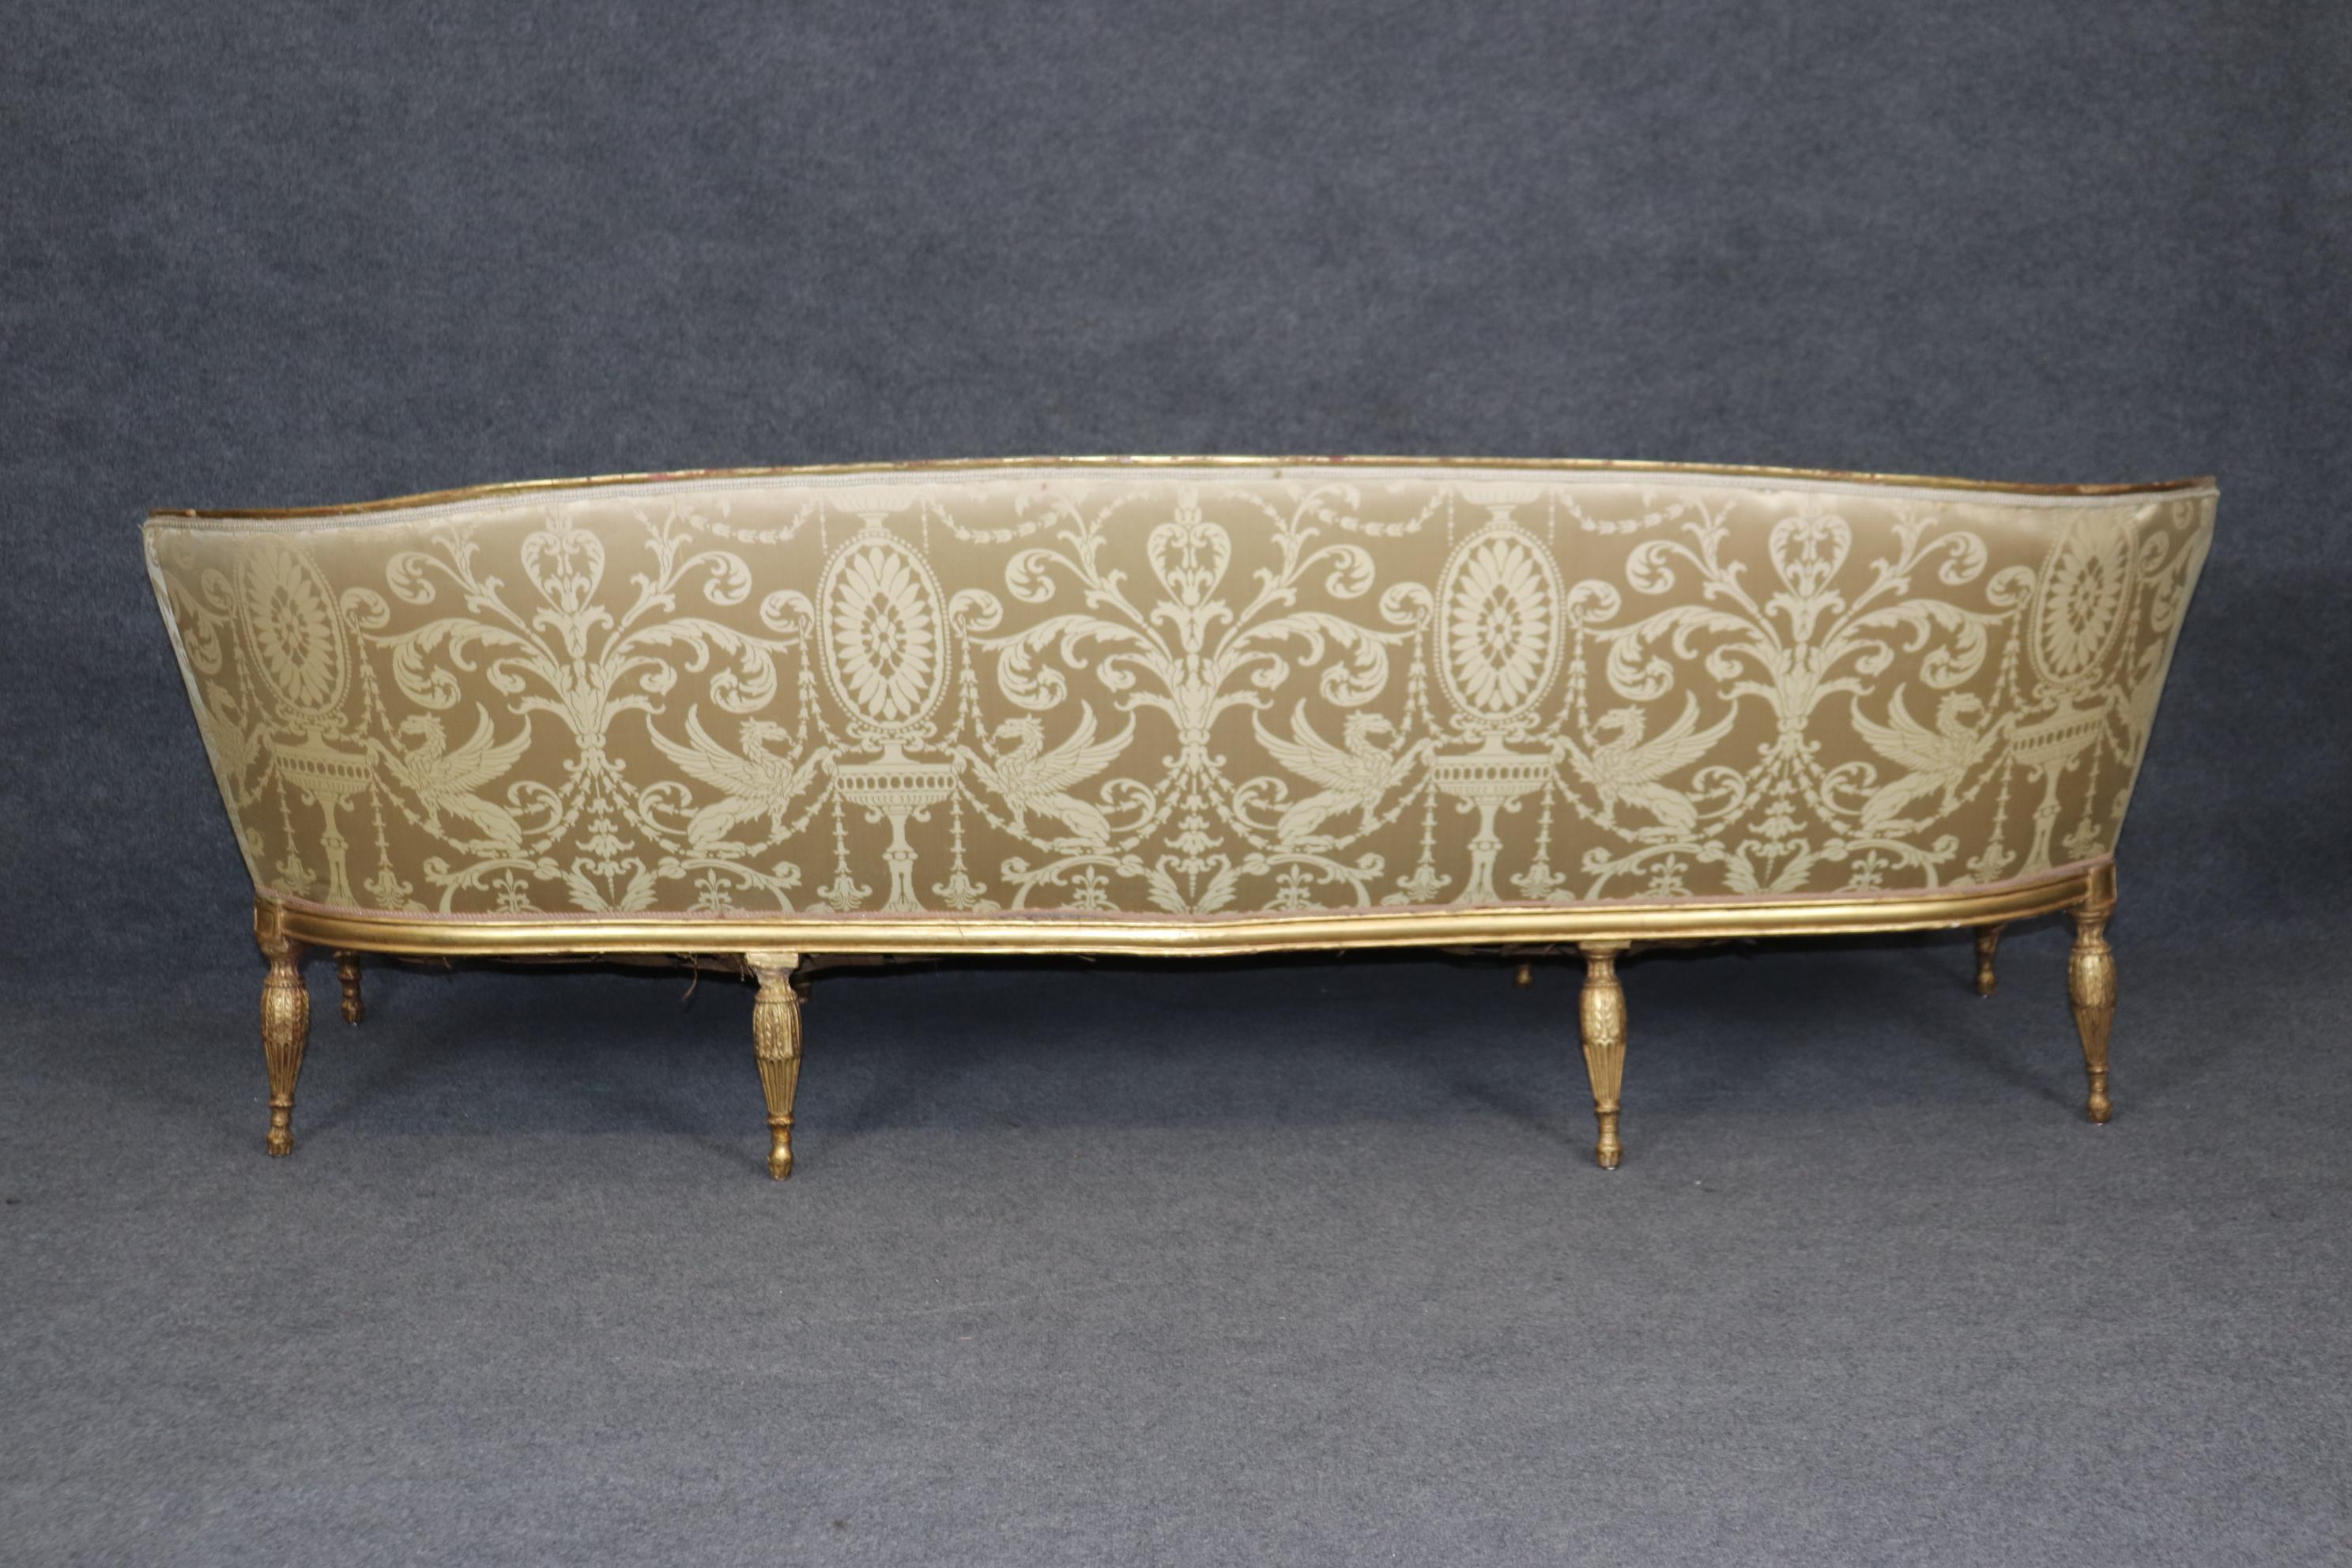 Monumental Gilded Meticulously Carved French Louis XVI Sofa Silk Upholstery For Sale 6